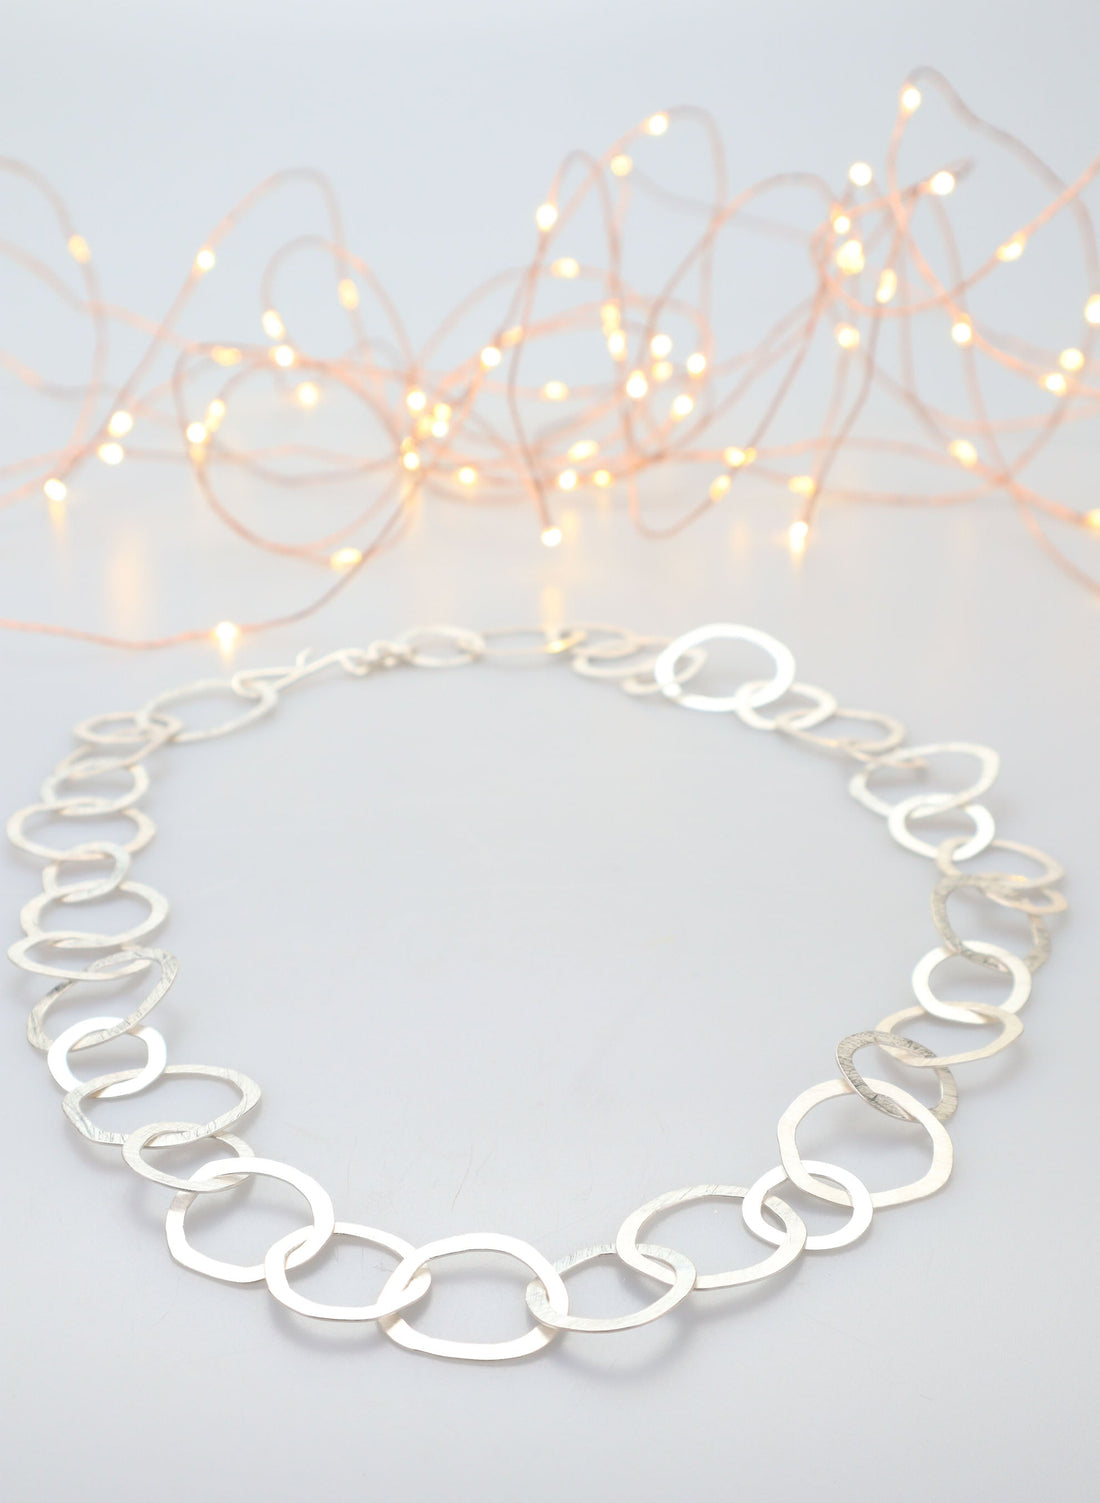 Round Link Small Necklace - Sterling Silver